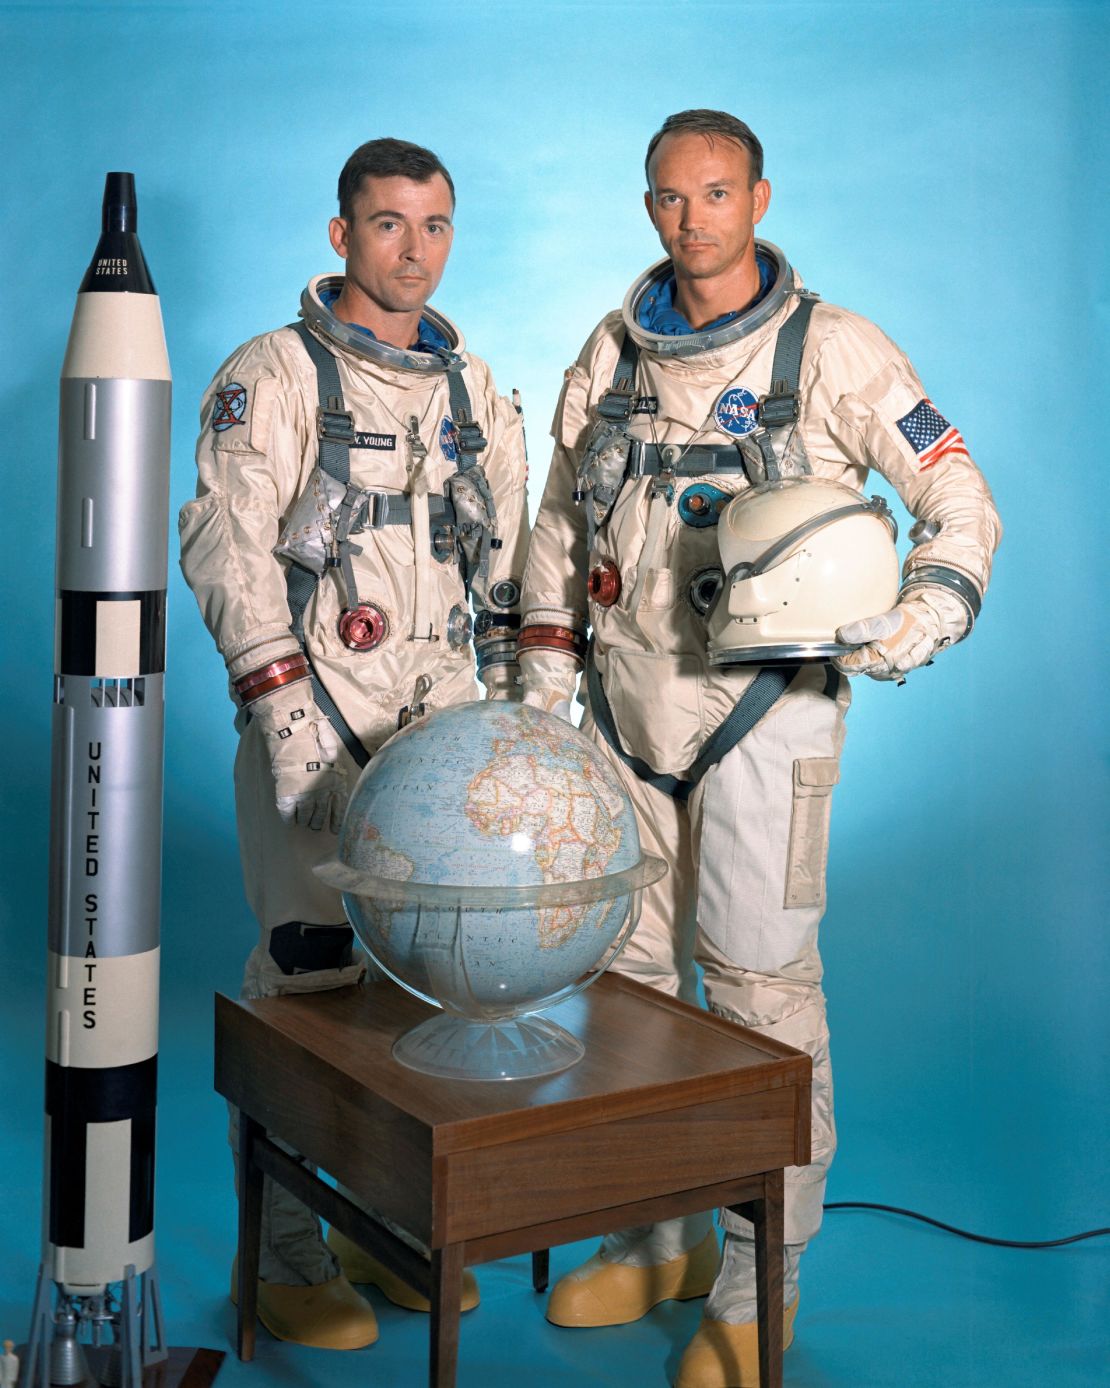 The Gemini X prime crew was made up of astronauts John W. Young (left), command pilot, and Michael Collins, pilot.